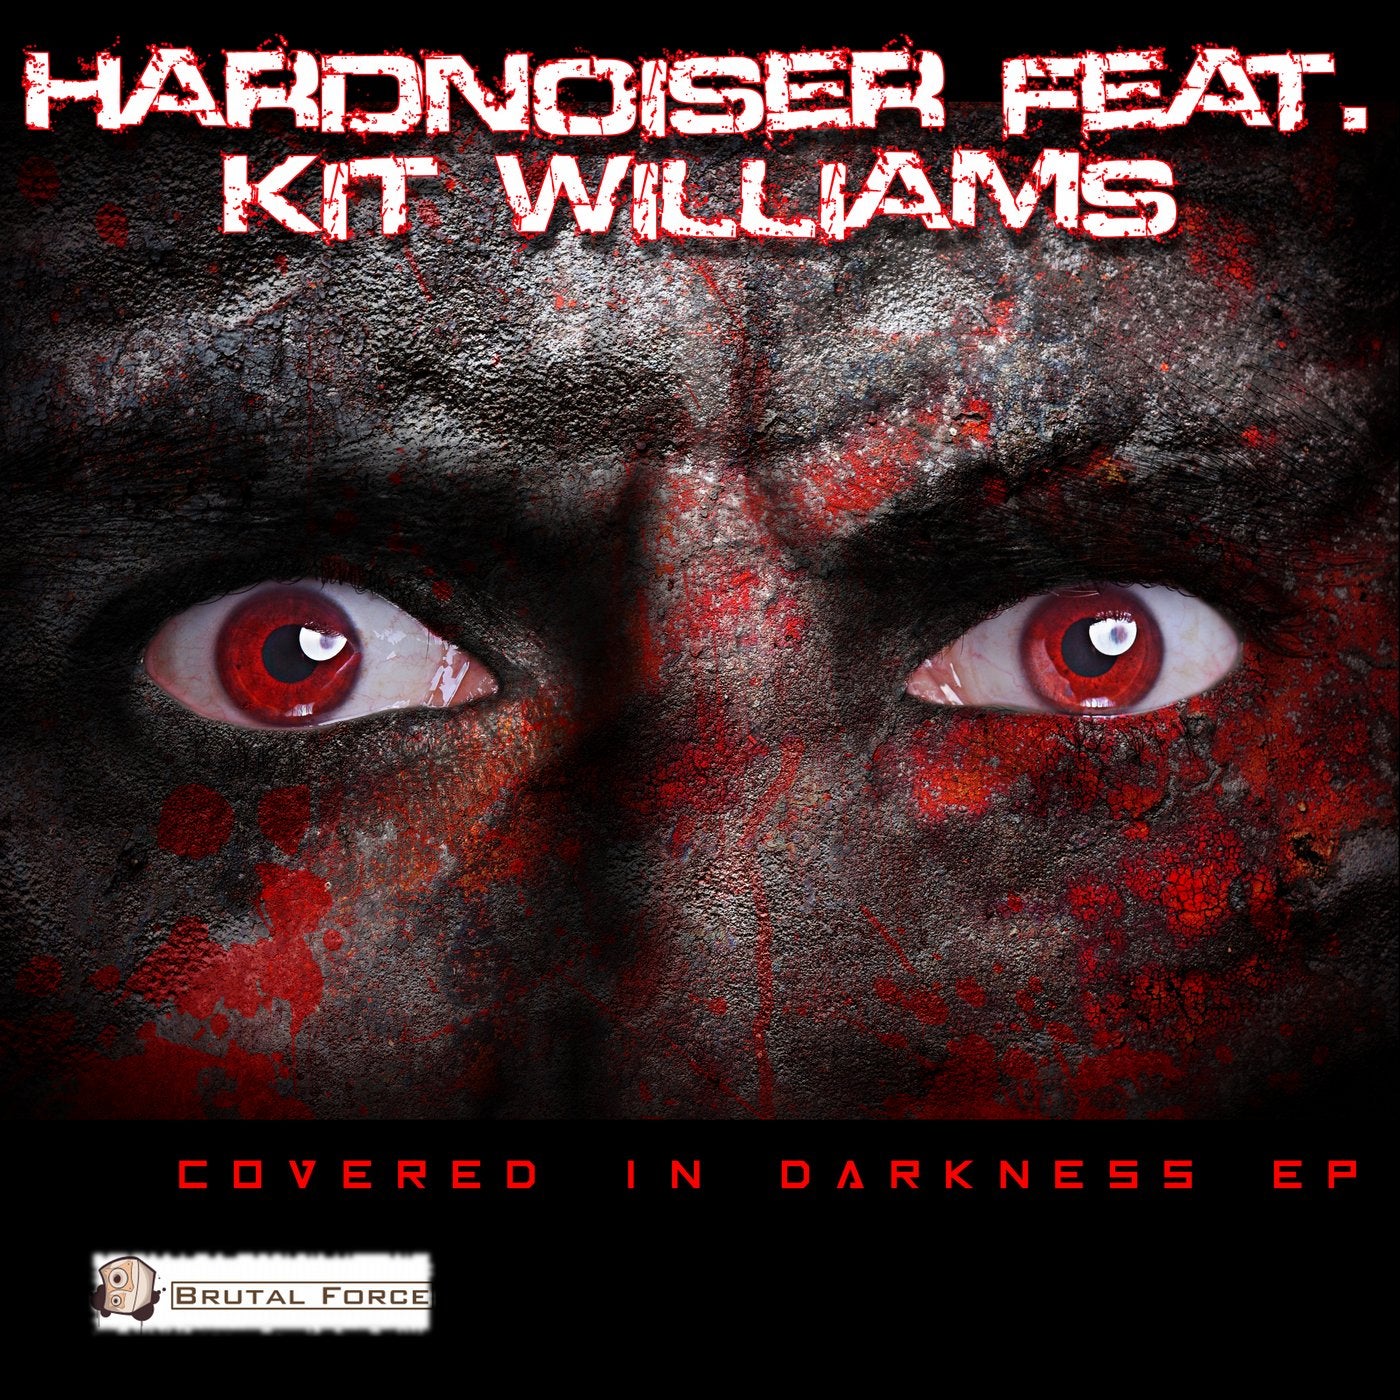 Covered in Darkness EP